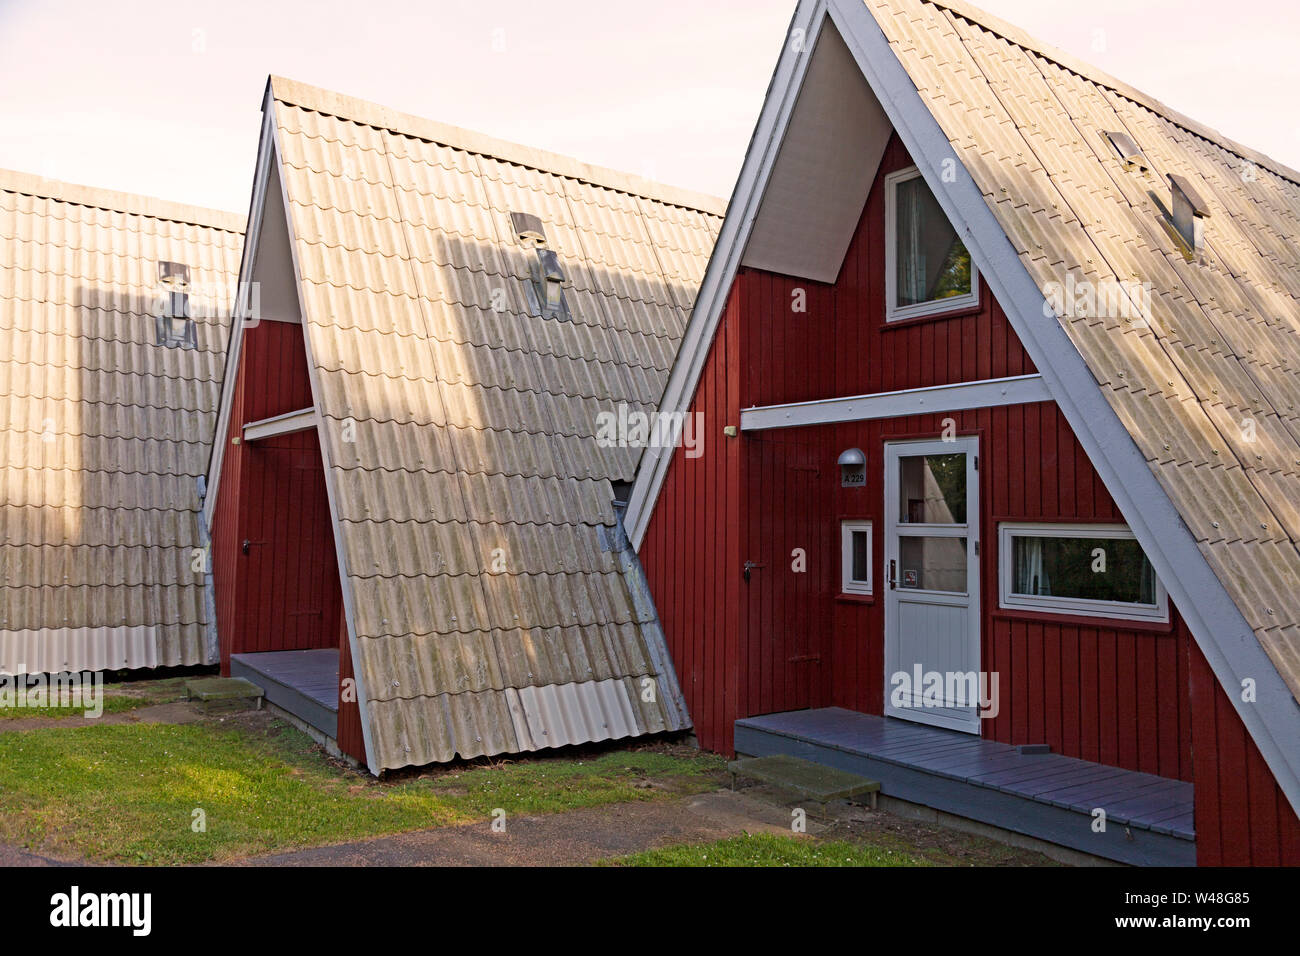 Triangle Houses High Resolution Stock Photography and Images - Alamy